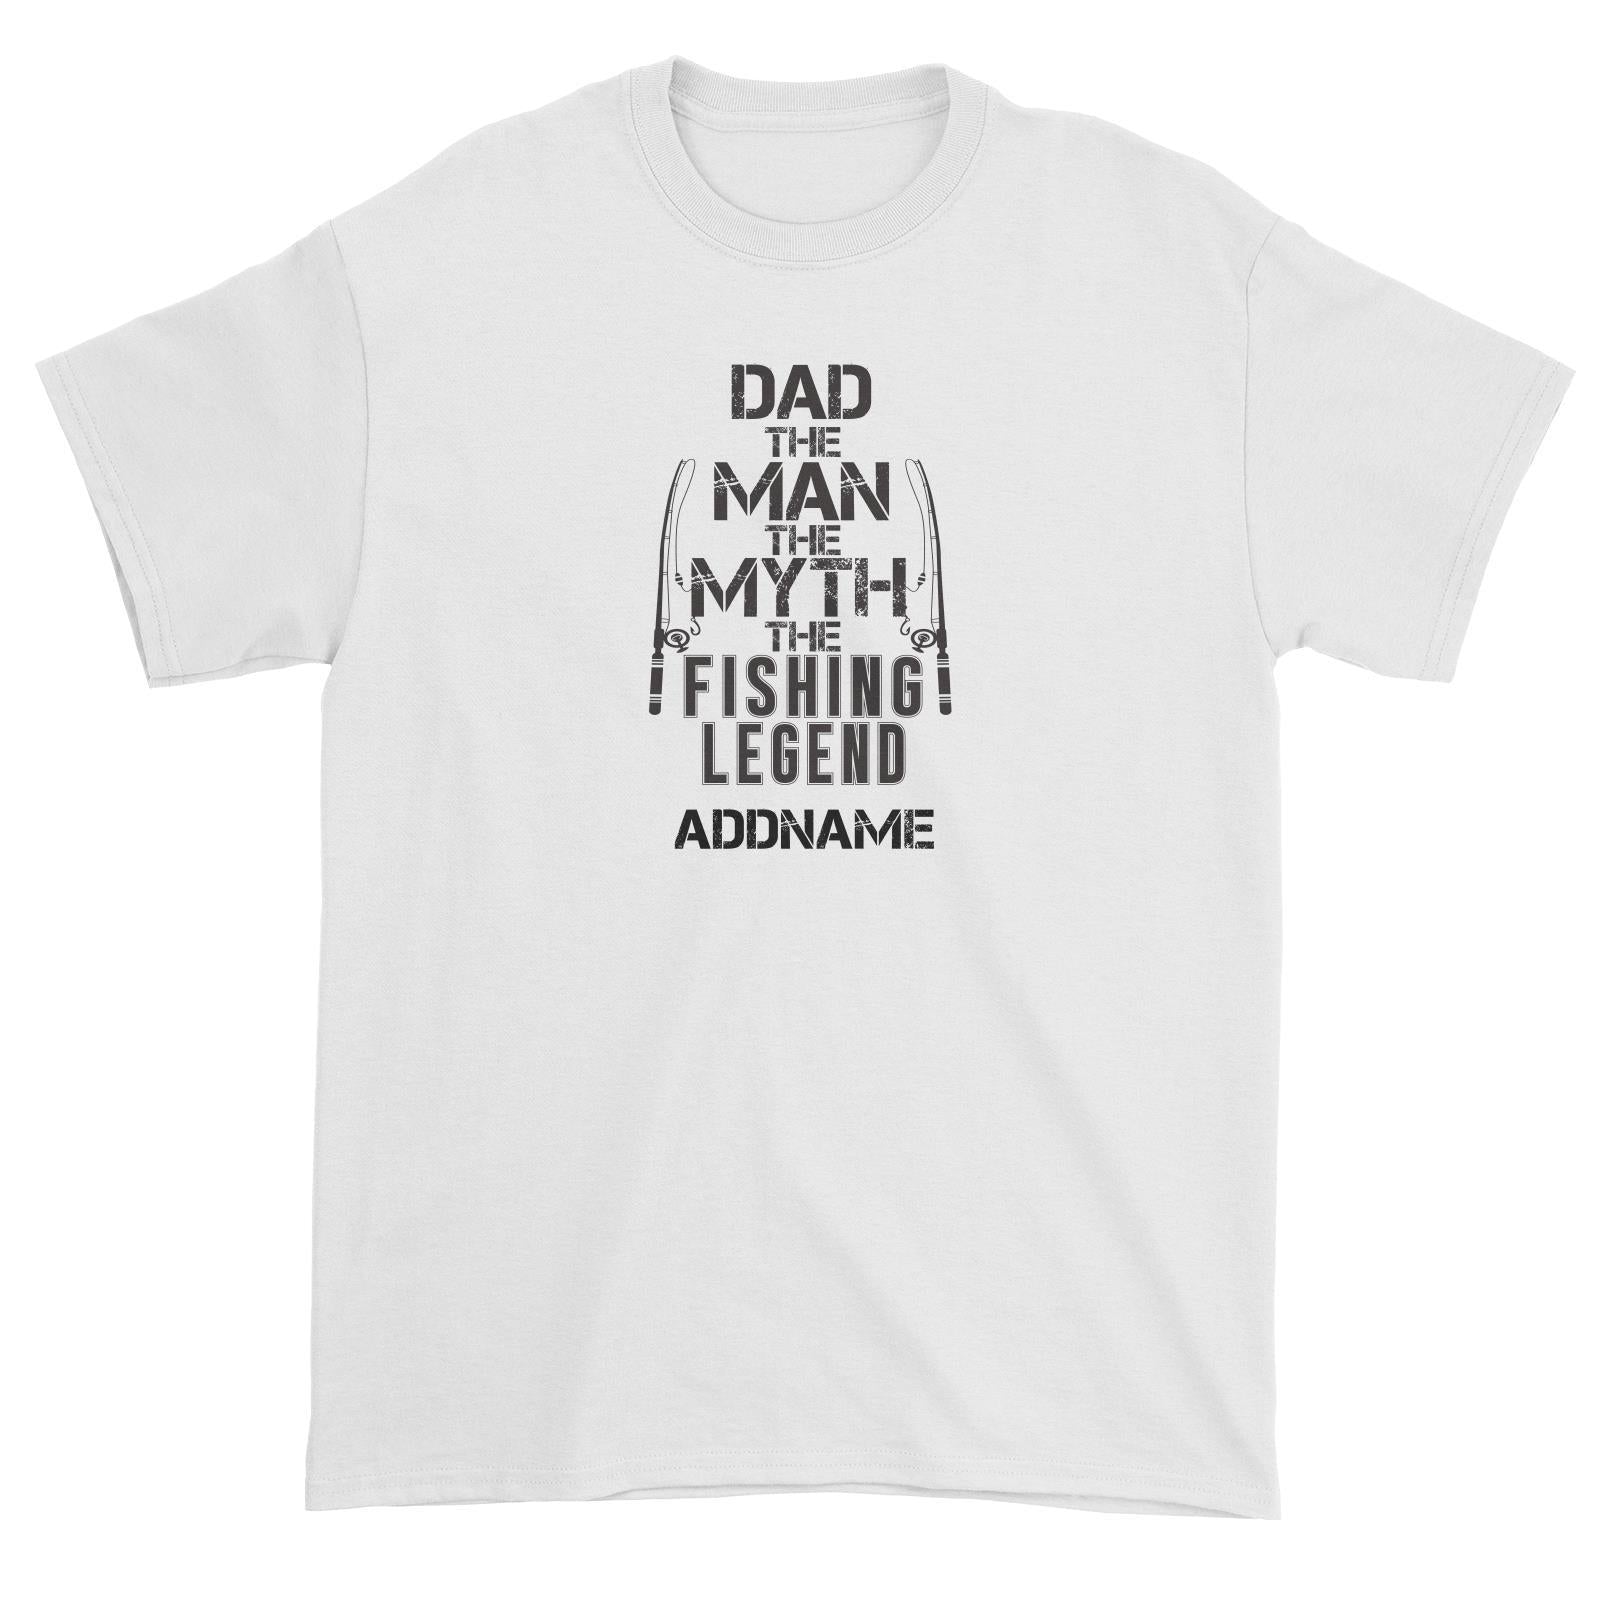 Dad The Man The Myth The Fishing Legend Addname Unisex T-Shirt